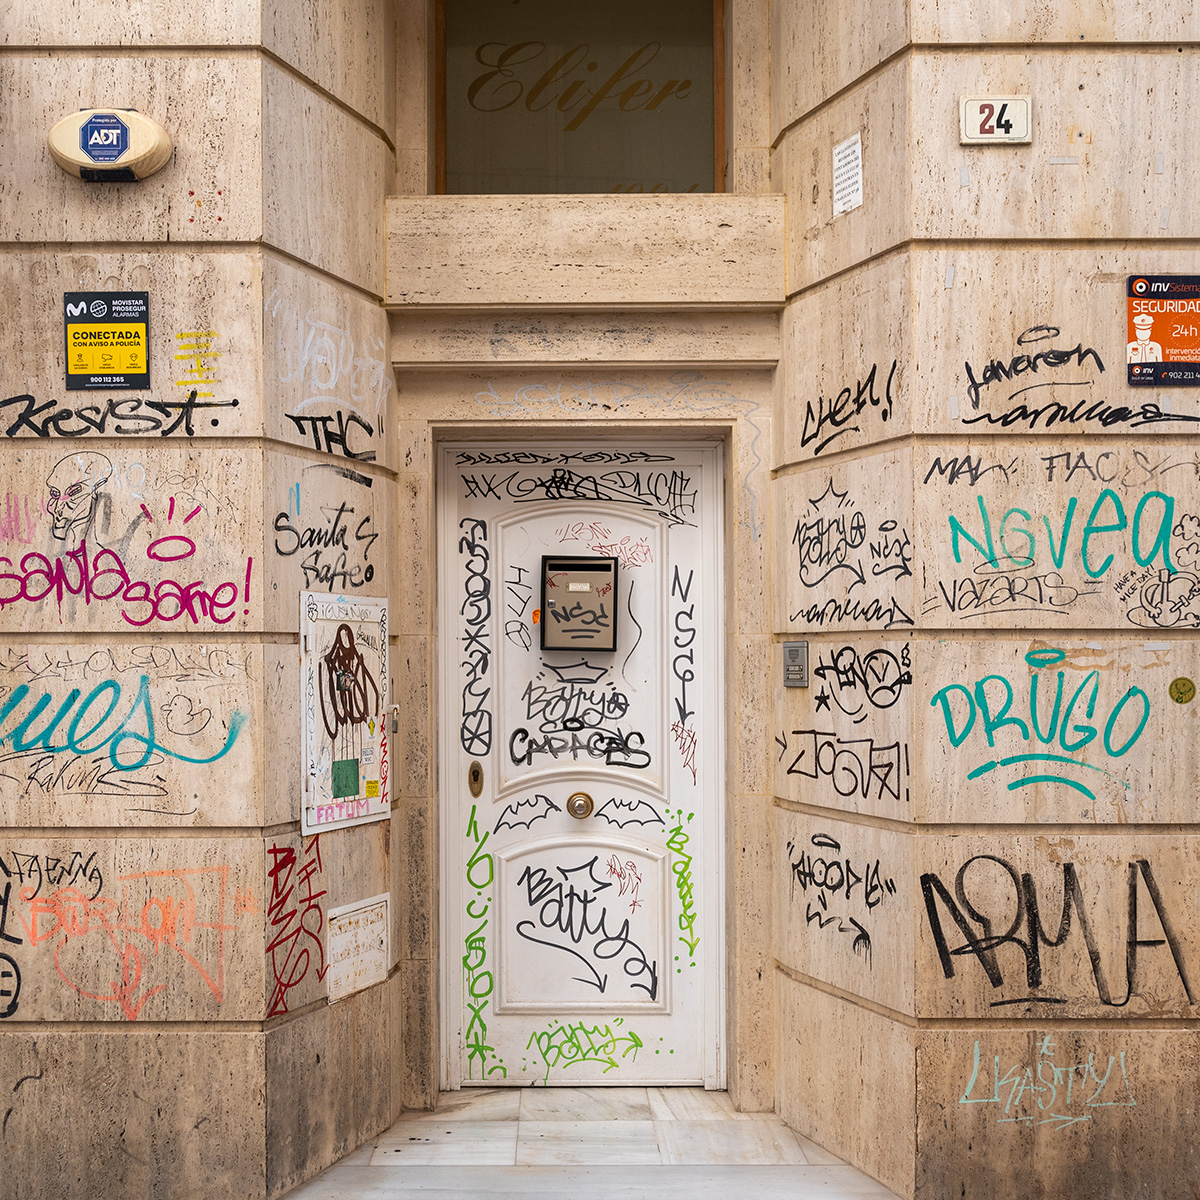 A photo of exterior doorway covered in graffiti